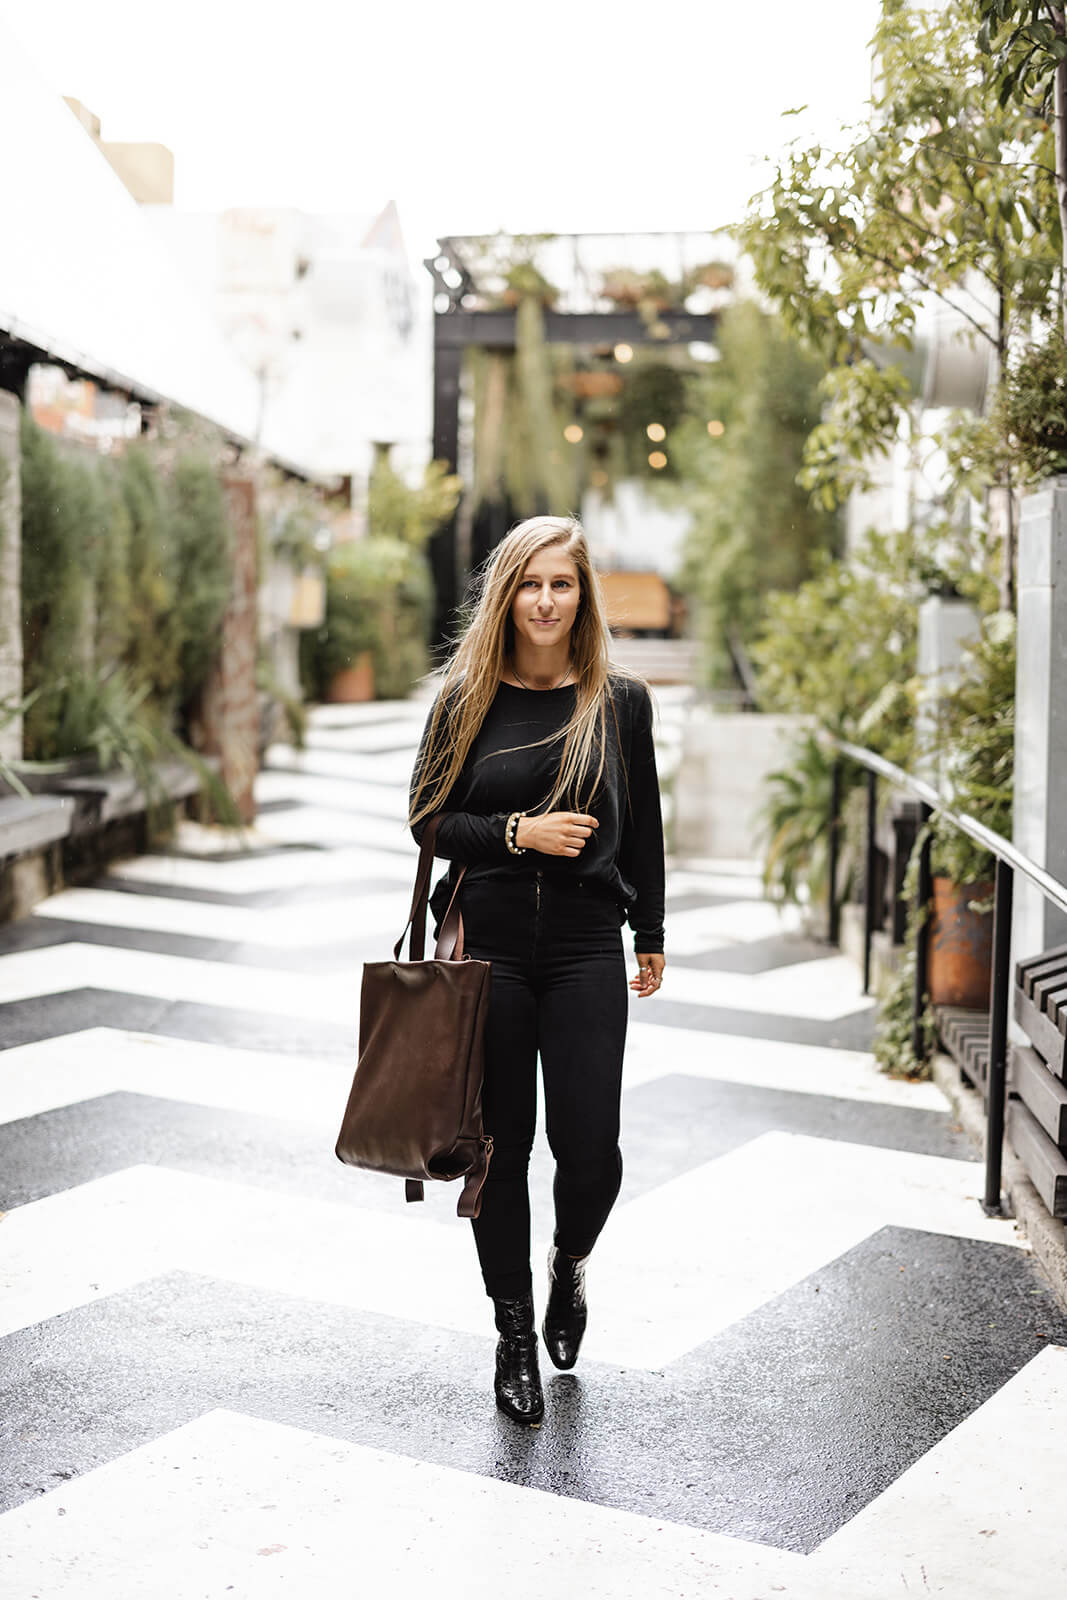 Blonde woman in black clothes walking along black and white zigzag ground surrounded by greenery. She is wearing a brown leather tote on the inside of her elbow. The tote is the Chocolate Brown Leather Backpack & Tote by Ella Jackson